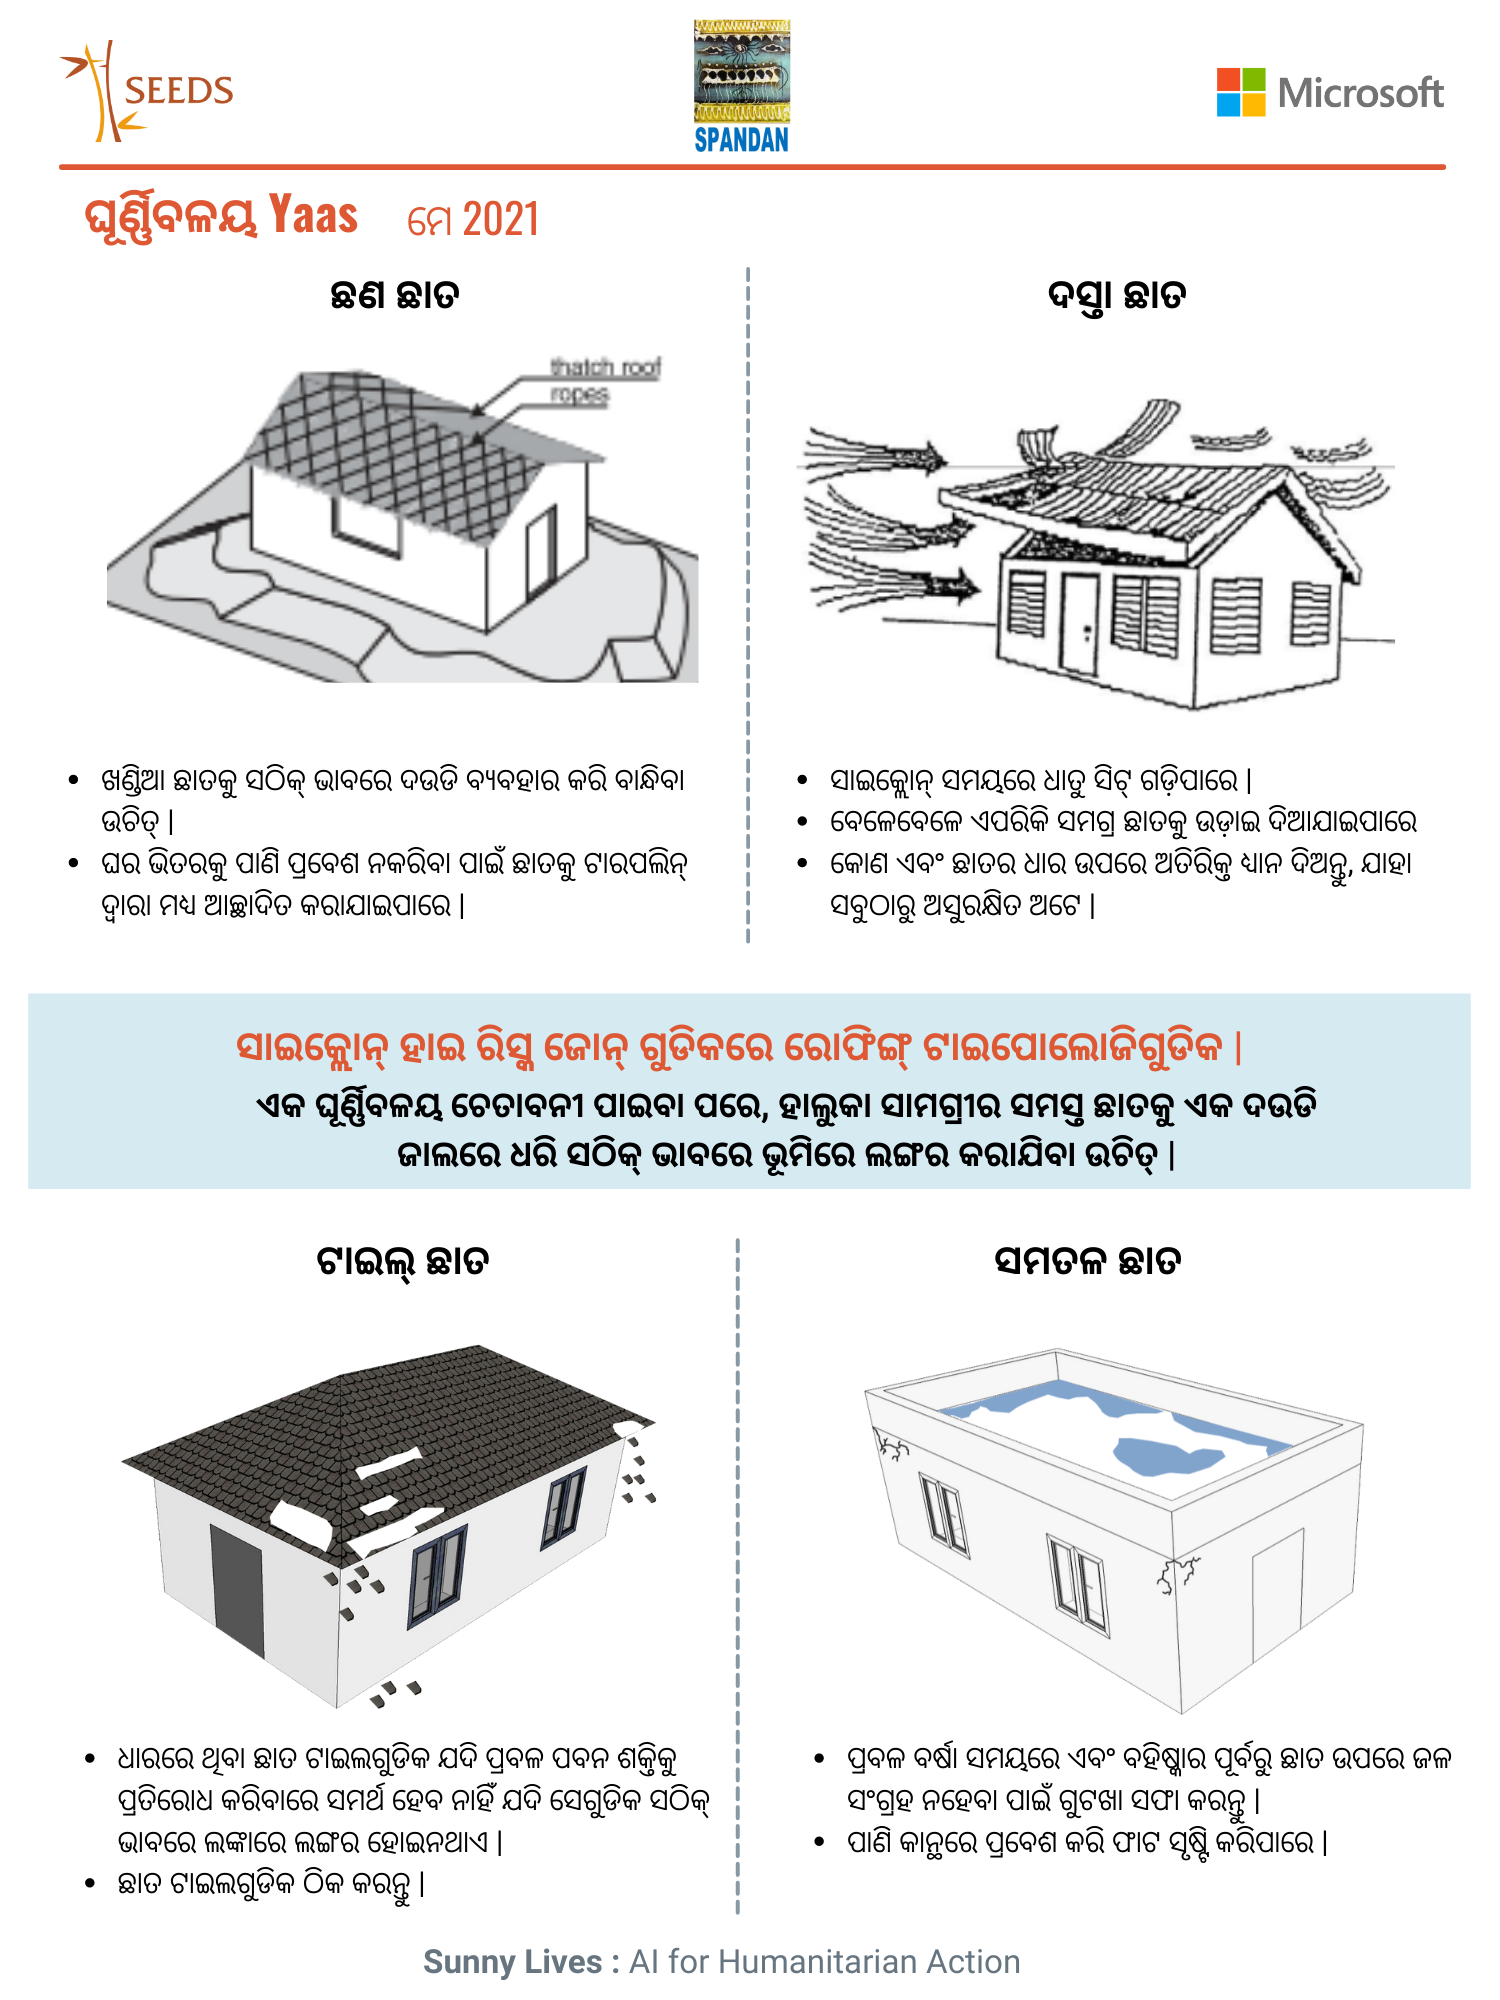 an advisory in Odia language depicting how cyclonic winds impact different kinds of roof structures